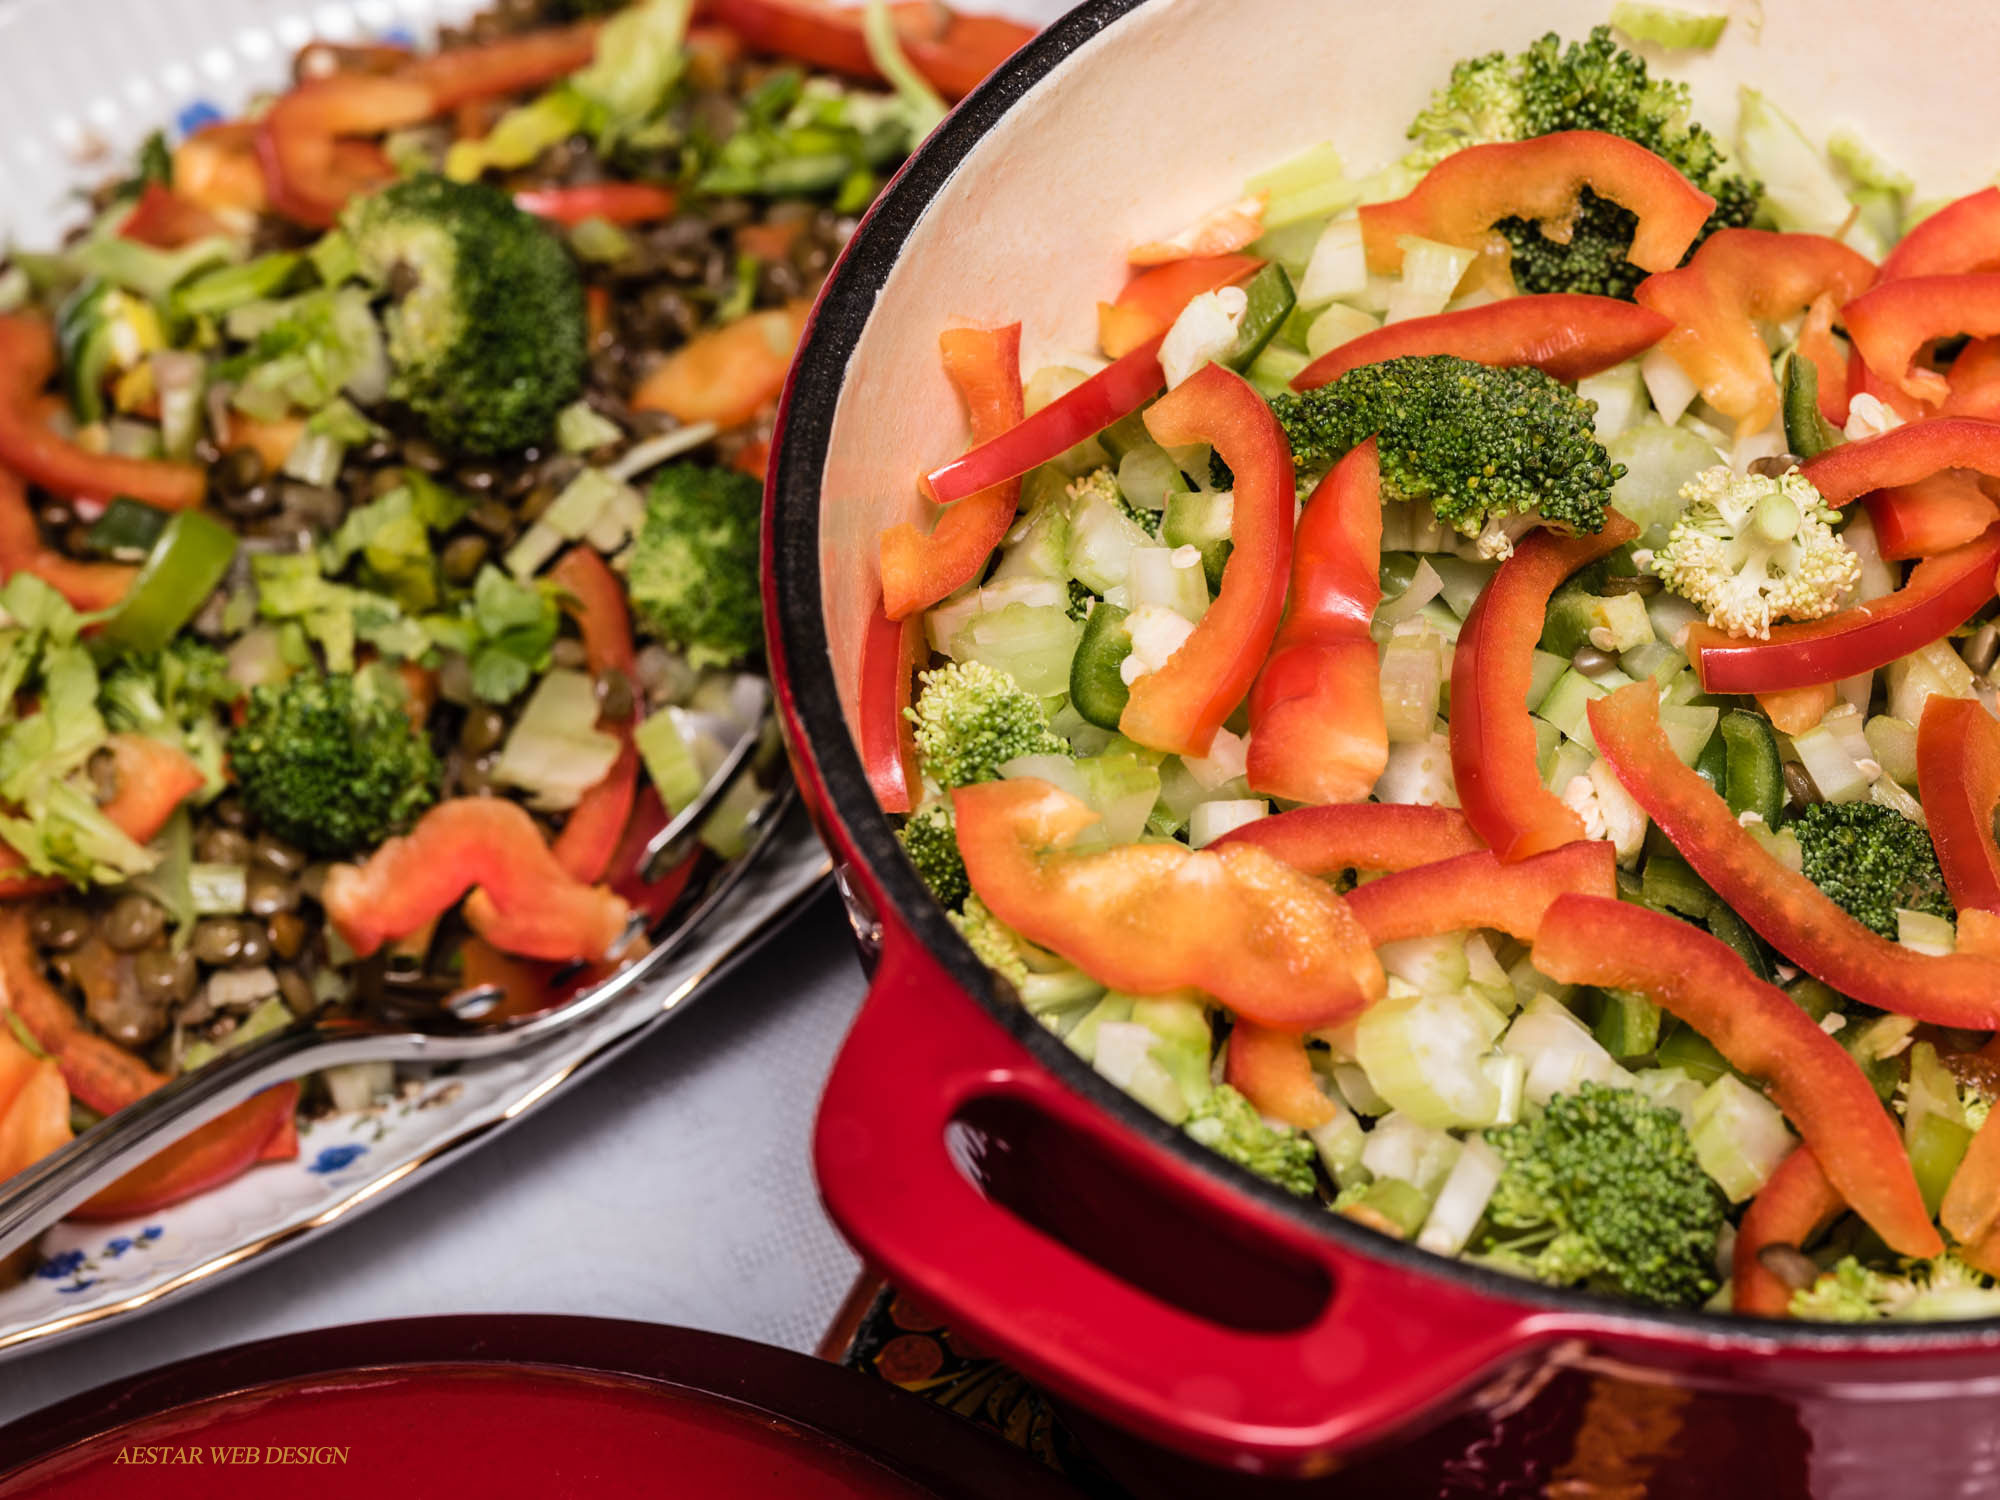 Web Product Photography, Food Photography, Lentils with Vegetables, Cast Iron Dutch Oven, New York City